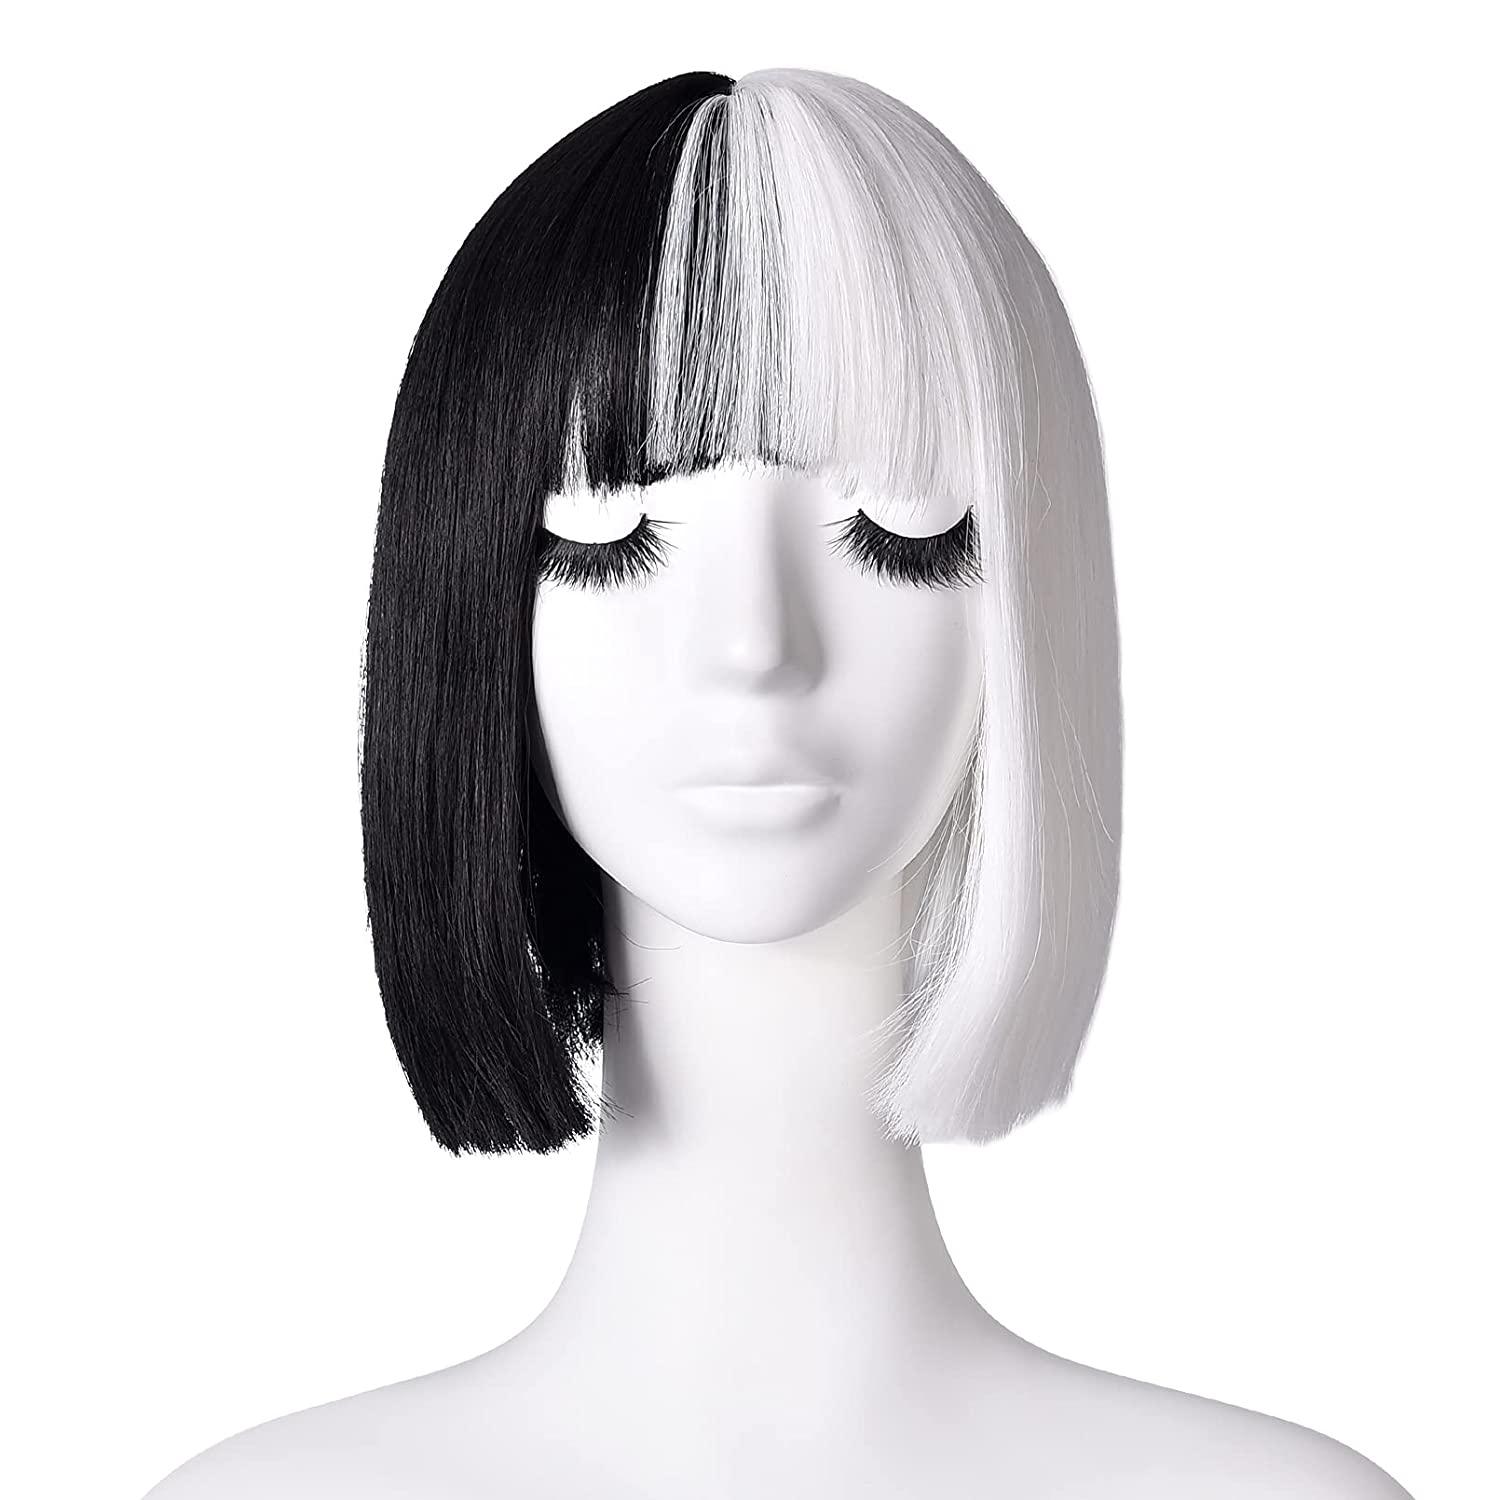 REECHO 11" Short Black and White Cosplay Wig with bangs Synthetic Hair for Women Halloween Costume Cosplay PartyColor: Black White - REECHO Hair